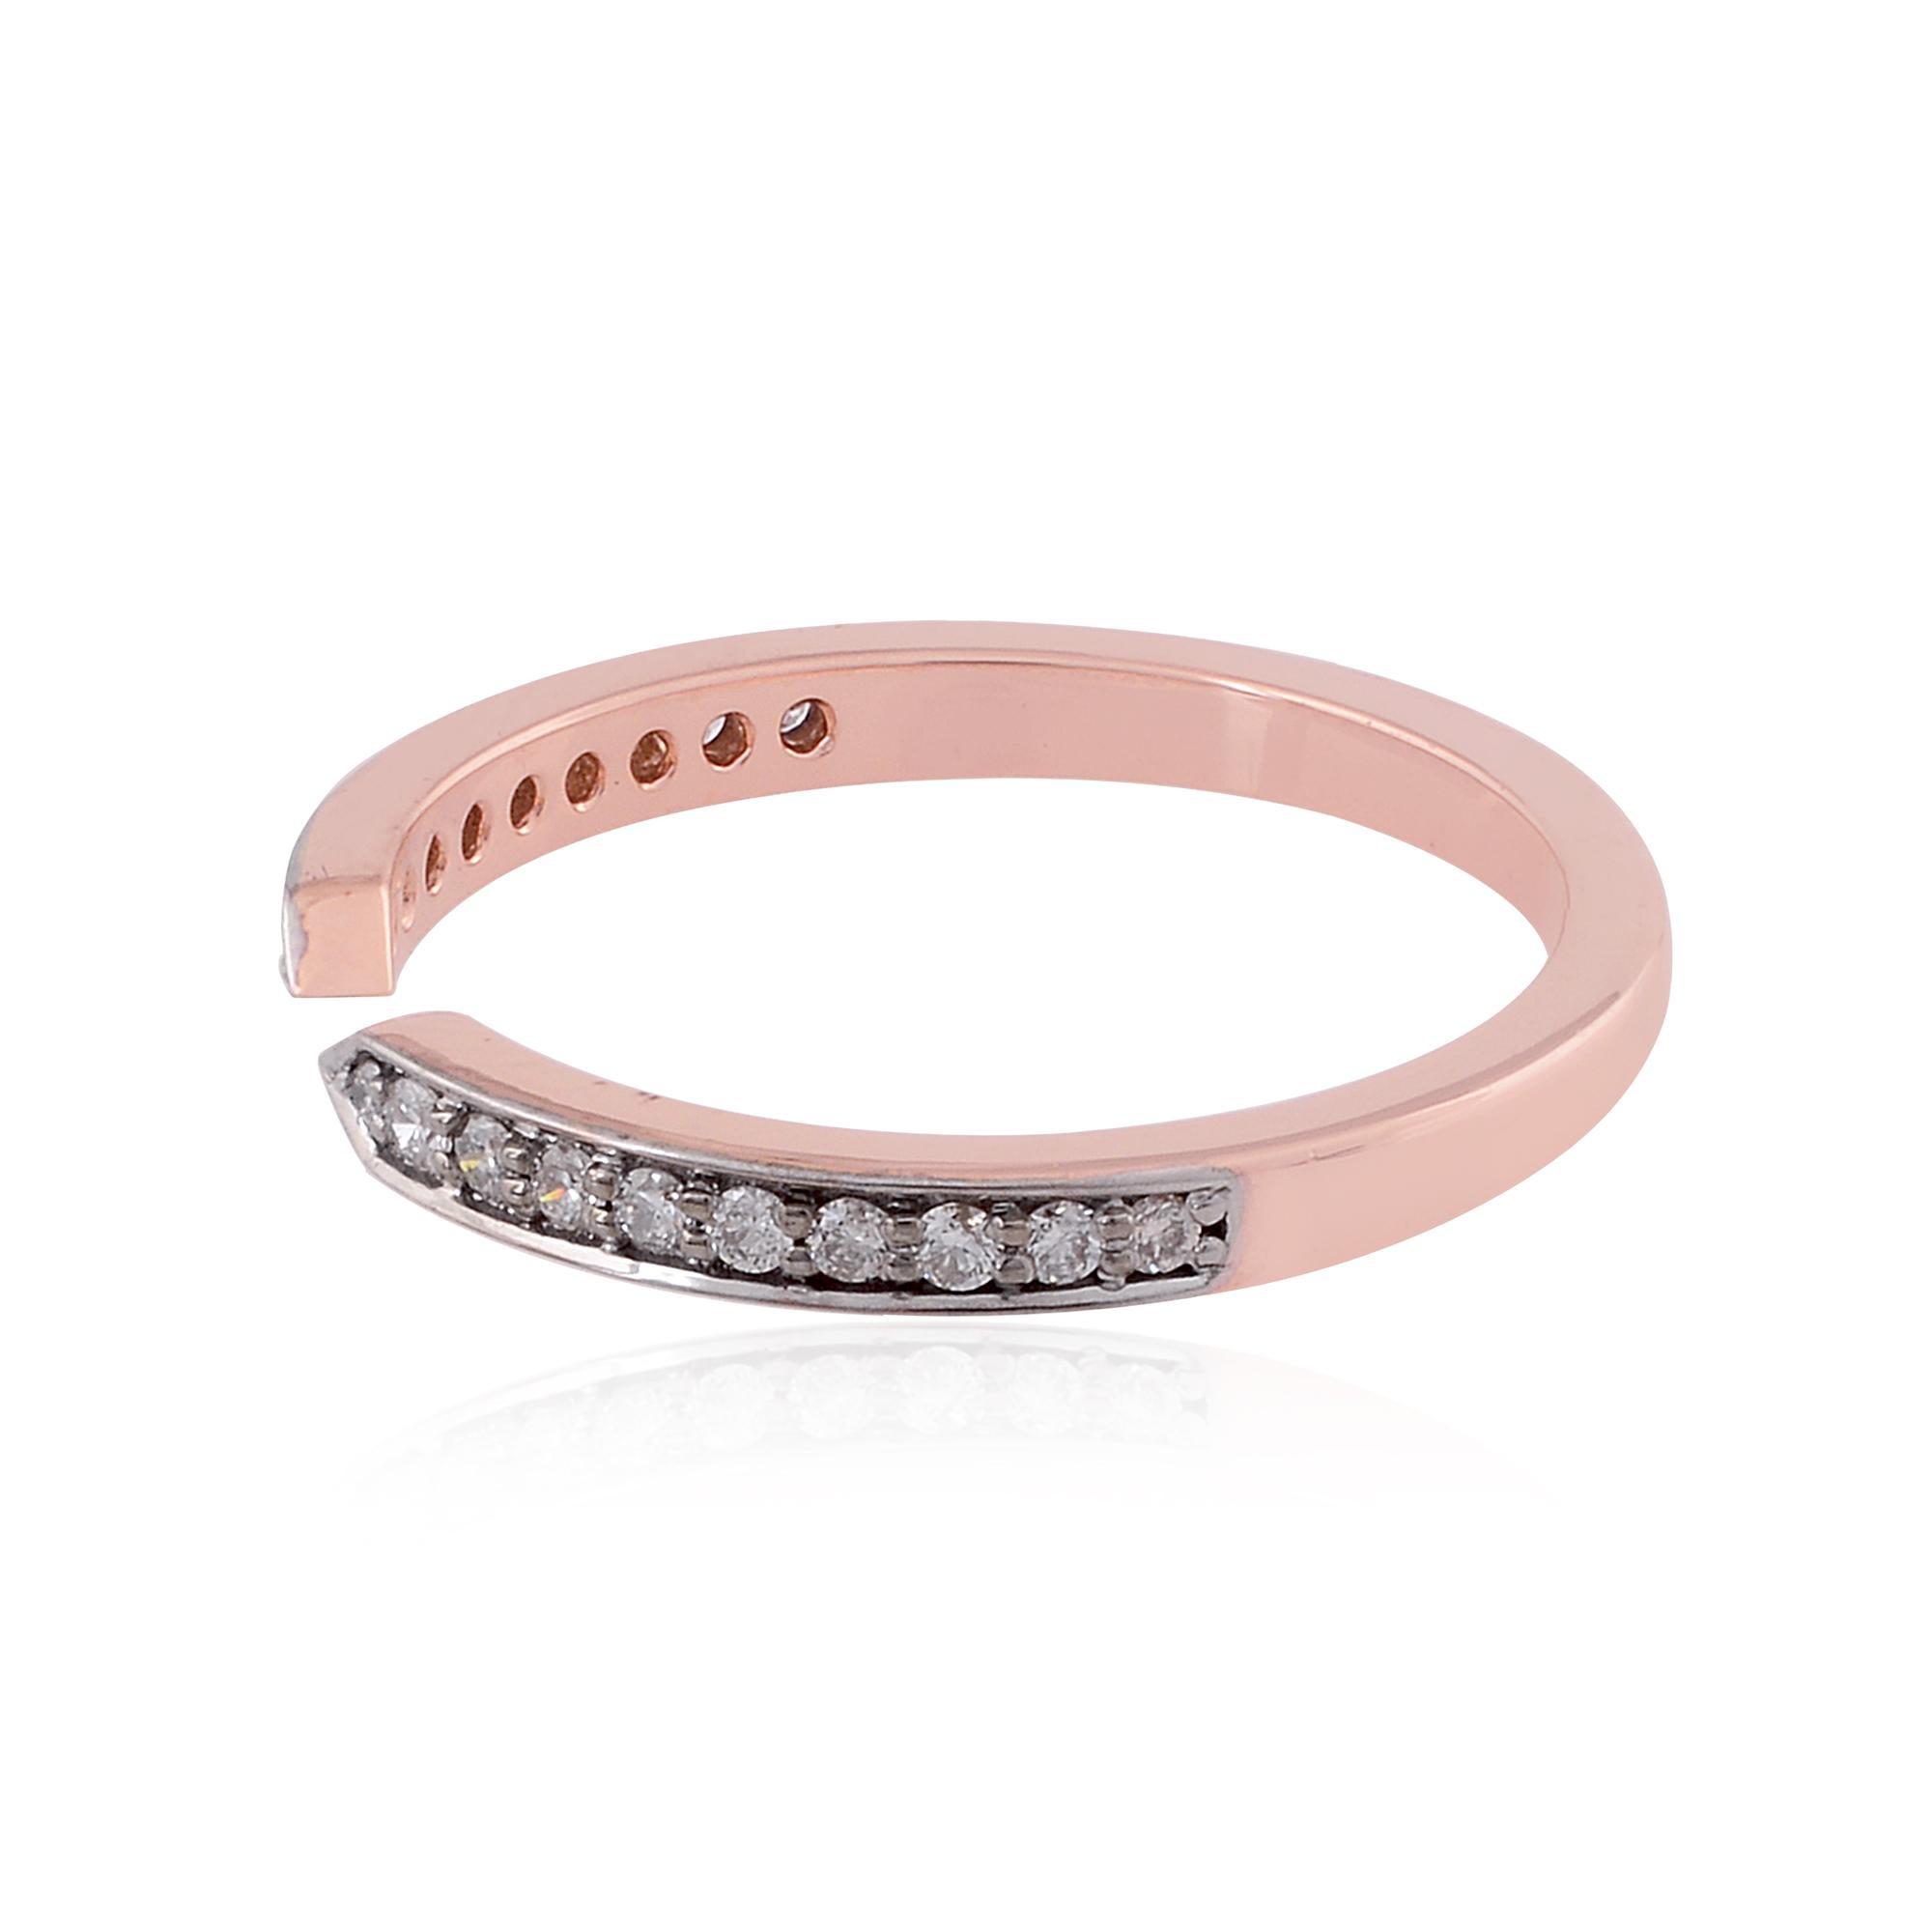 For Sale:  0.17 Carat SI Clarity HI Color Diamond Cuff Band Ring 18 Karat Rose Gold Jewelry 2